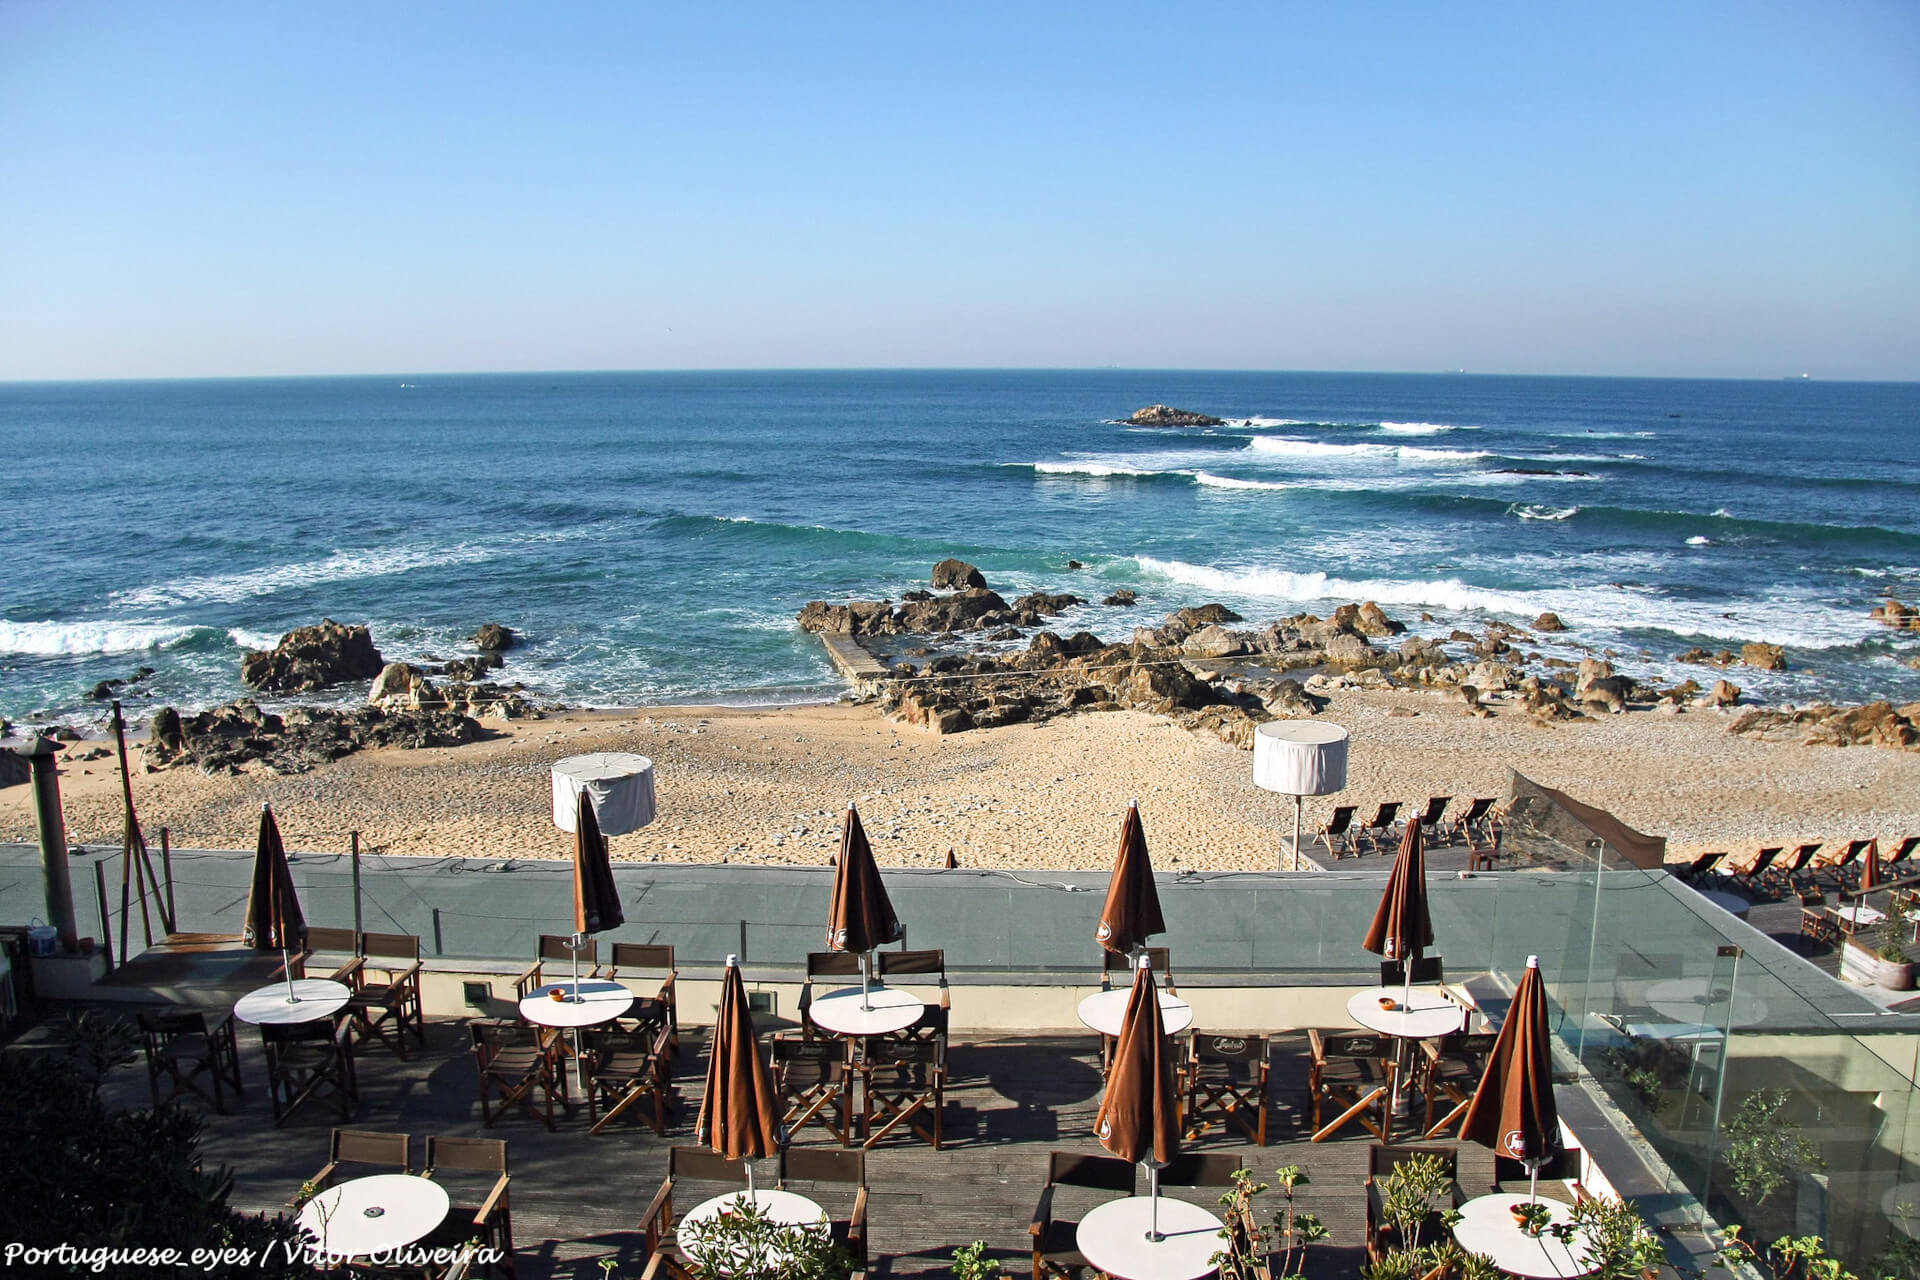 Beaches of Porto: Which one to visit?